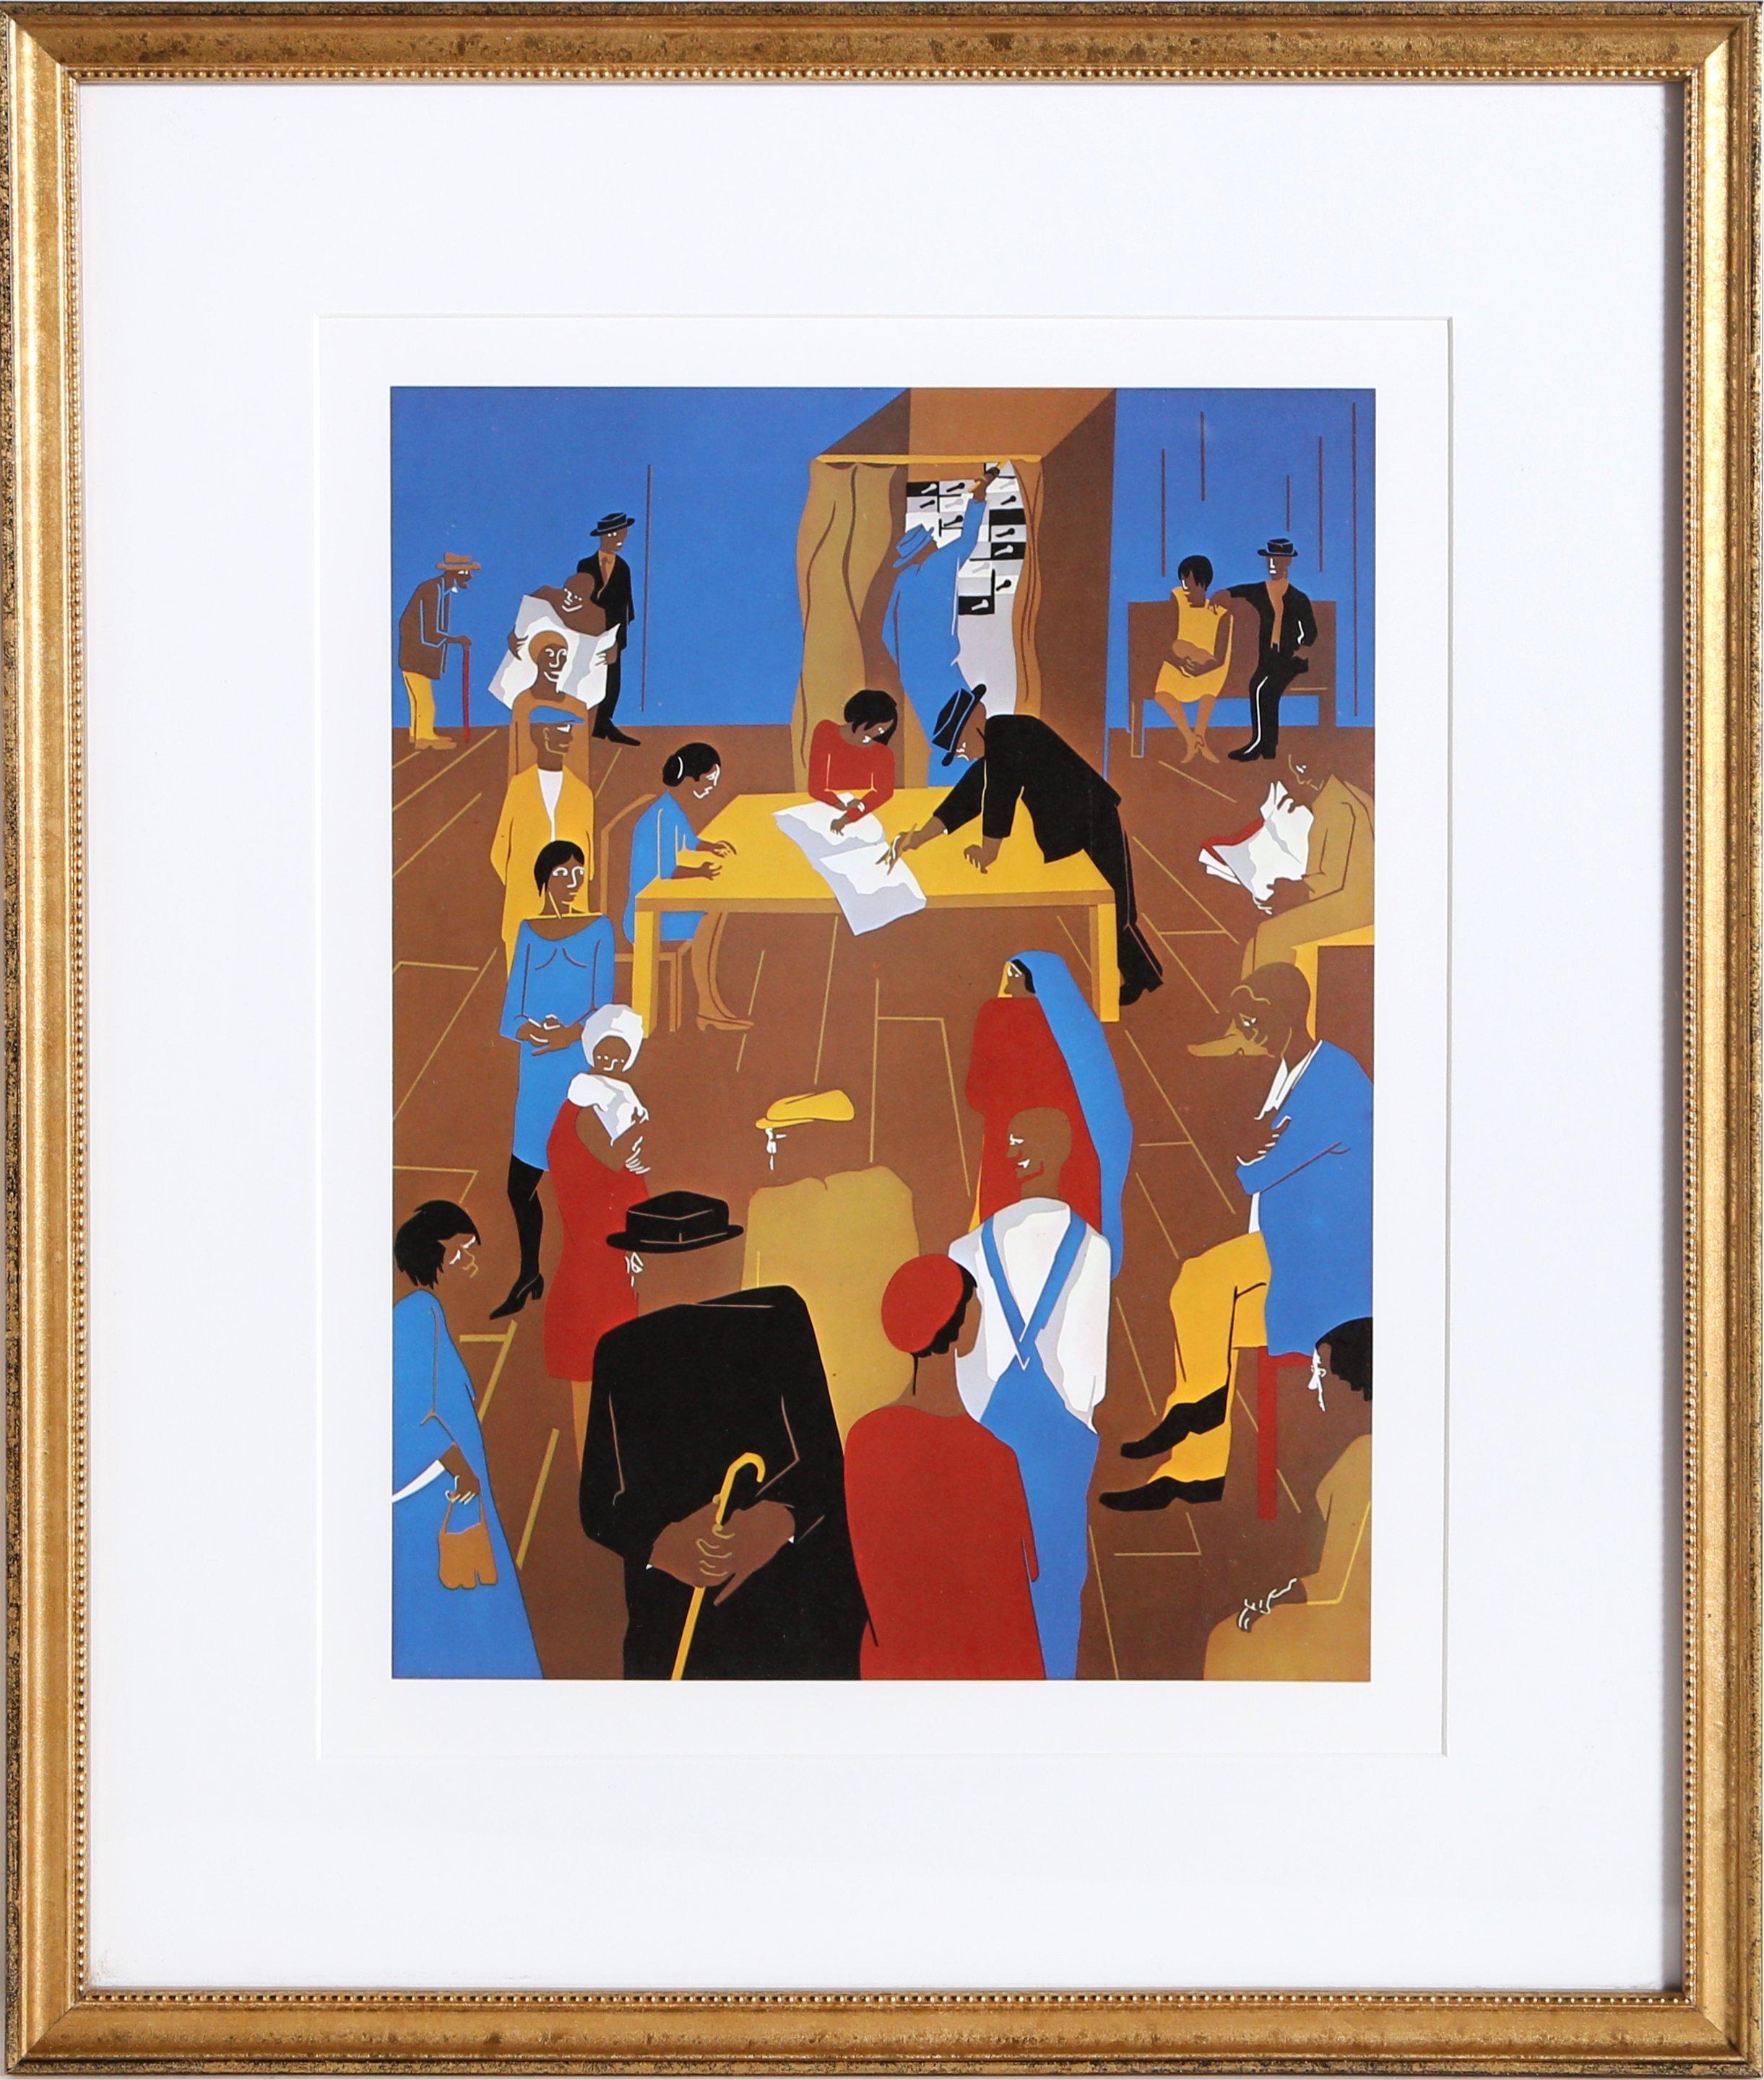 An original fine art print by Jacob Lawrence from the Kent Spirit of Independence Poster Portfolio, published in 1975 by Lorillard. The offset prints from this portfolio are unsigned.  The artwork is in excellent condition nicely framed. 

"The